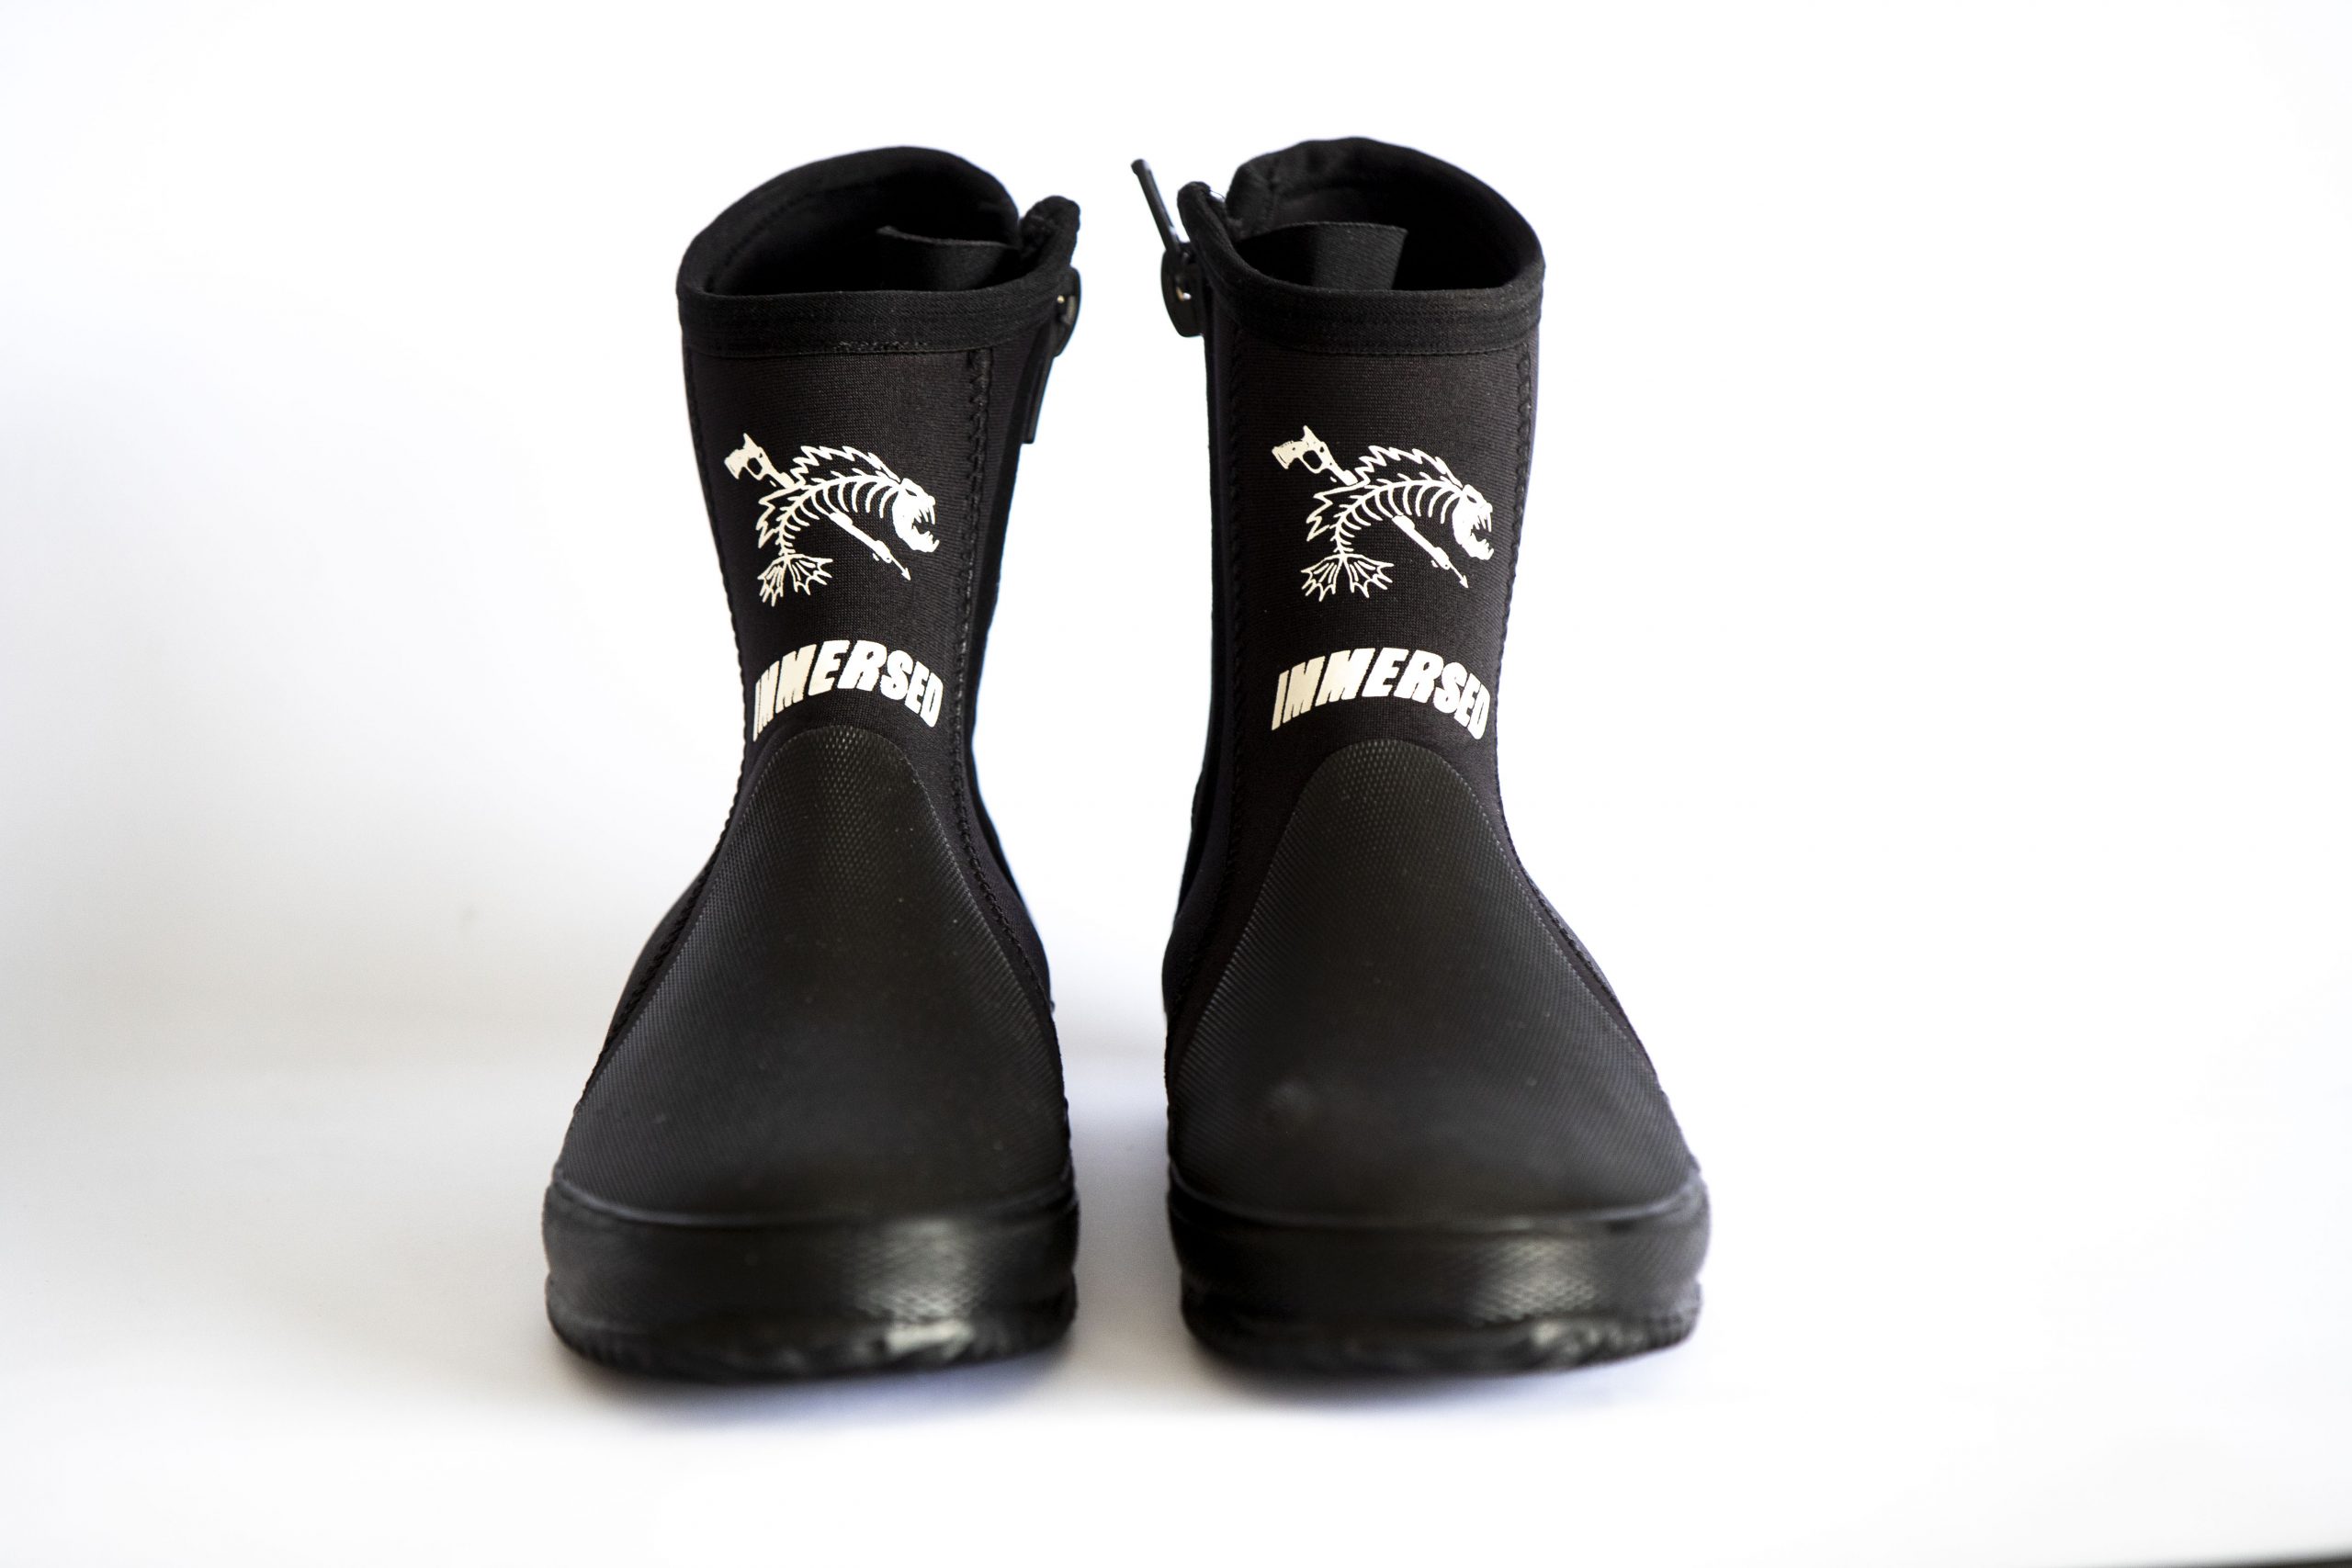 Classic Neoprene Boots 5mm (zip up side) with Tuff Rubber Sole - Sports